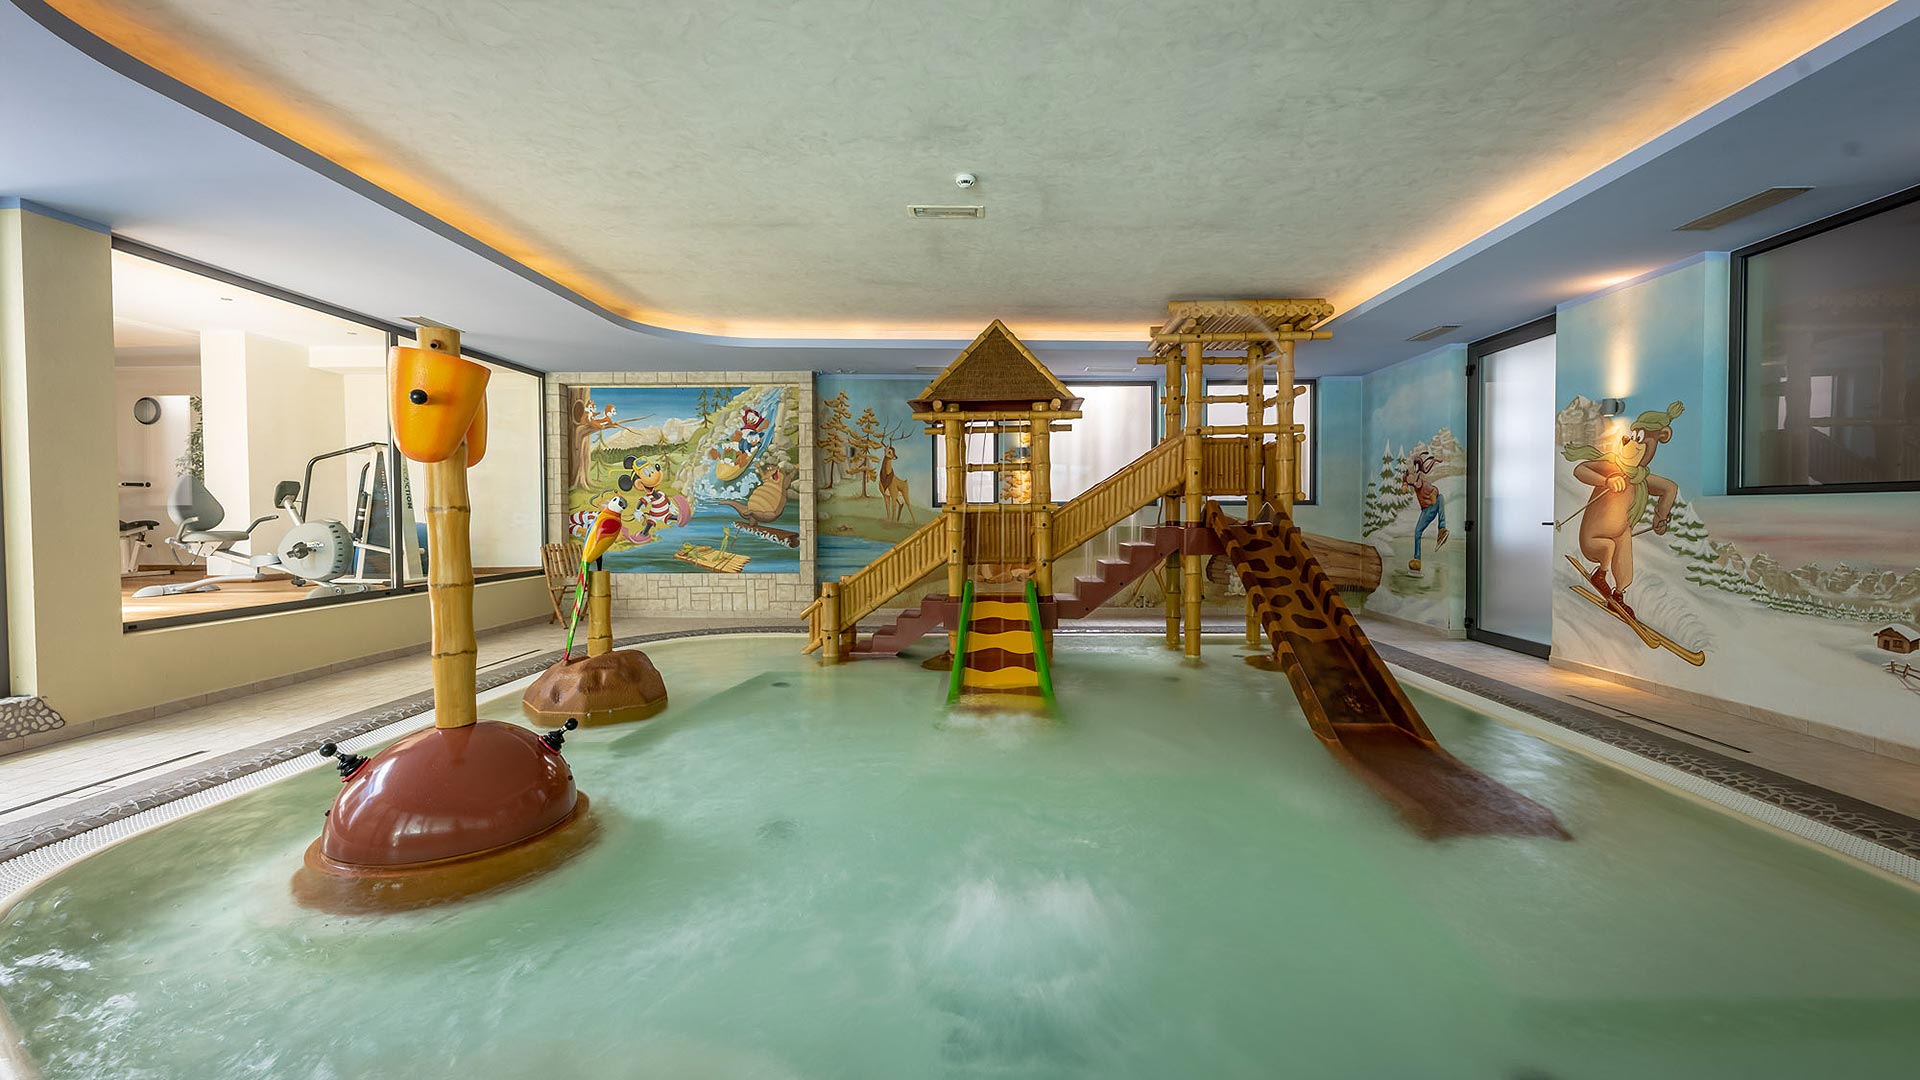 In the SPA of the AlpHoliday family hotel, there is also an area of pure fun for the little ones.